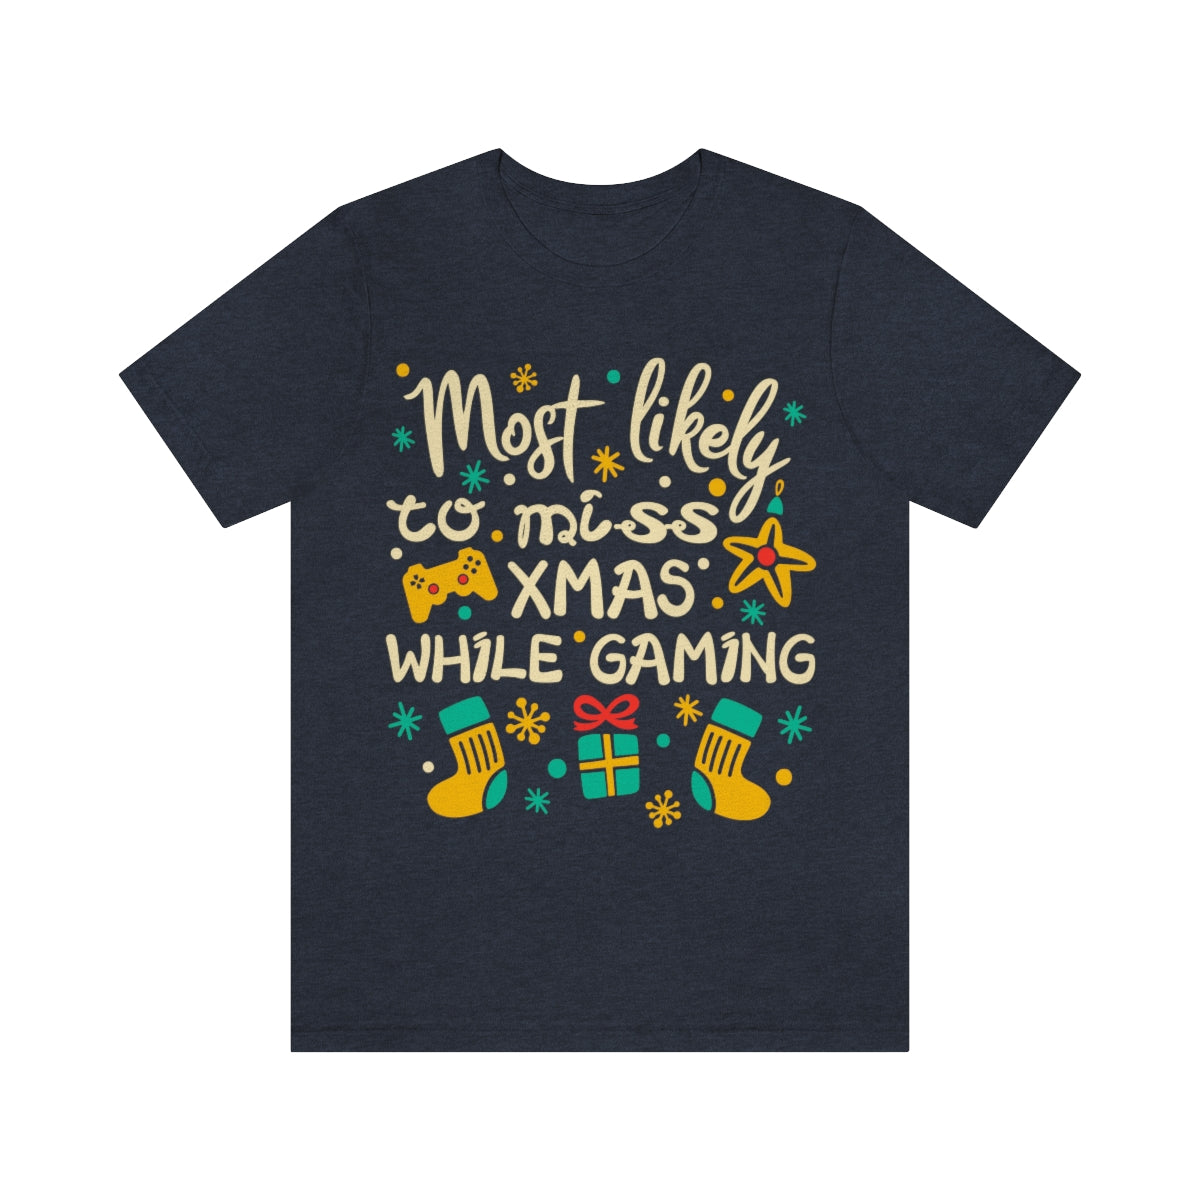 Most Likely to miss XMAS while gaming T-shirt for women or men, Most Likely To Christmas Shirts, Custom Most Likely T-Shirts - 37 Design Unit